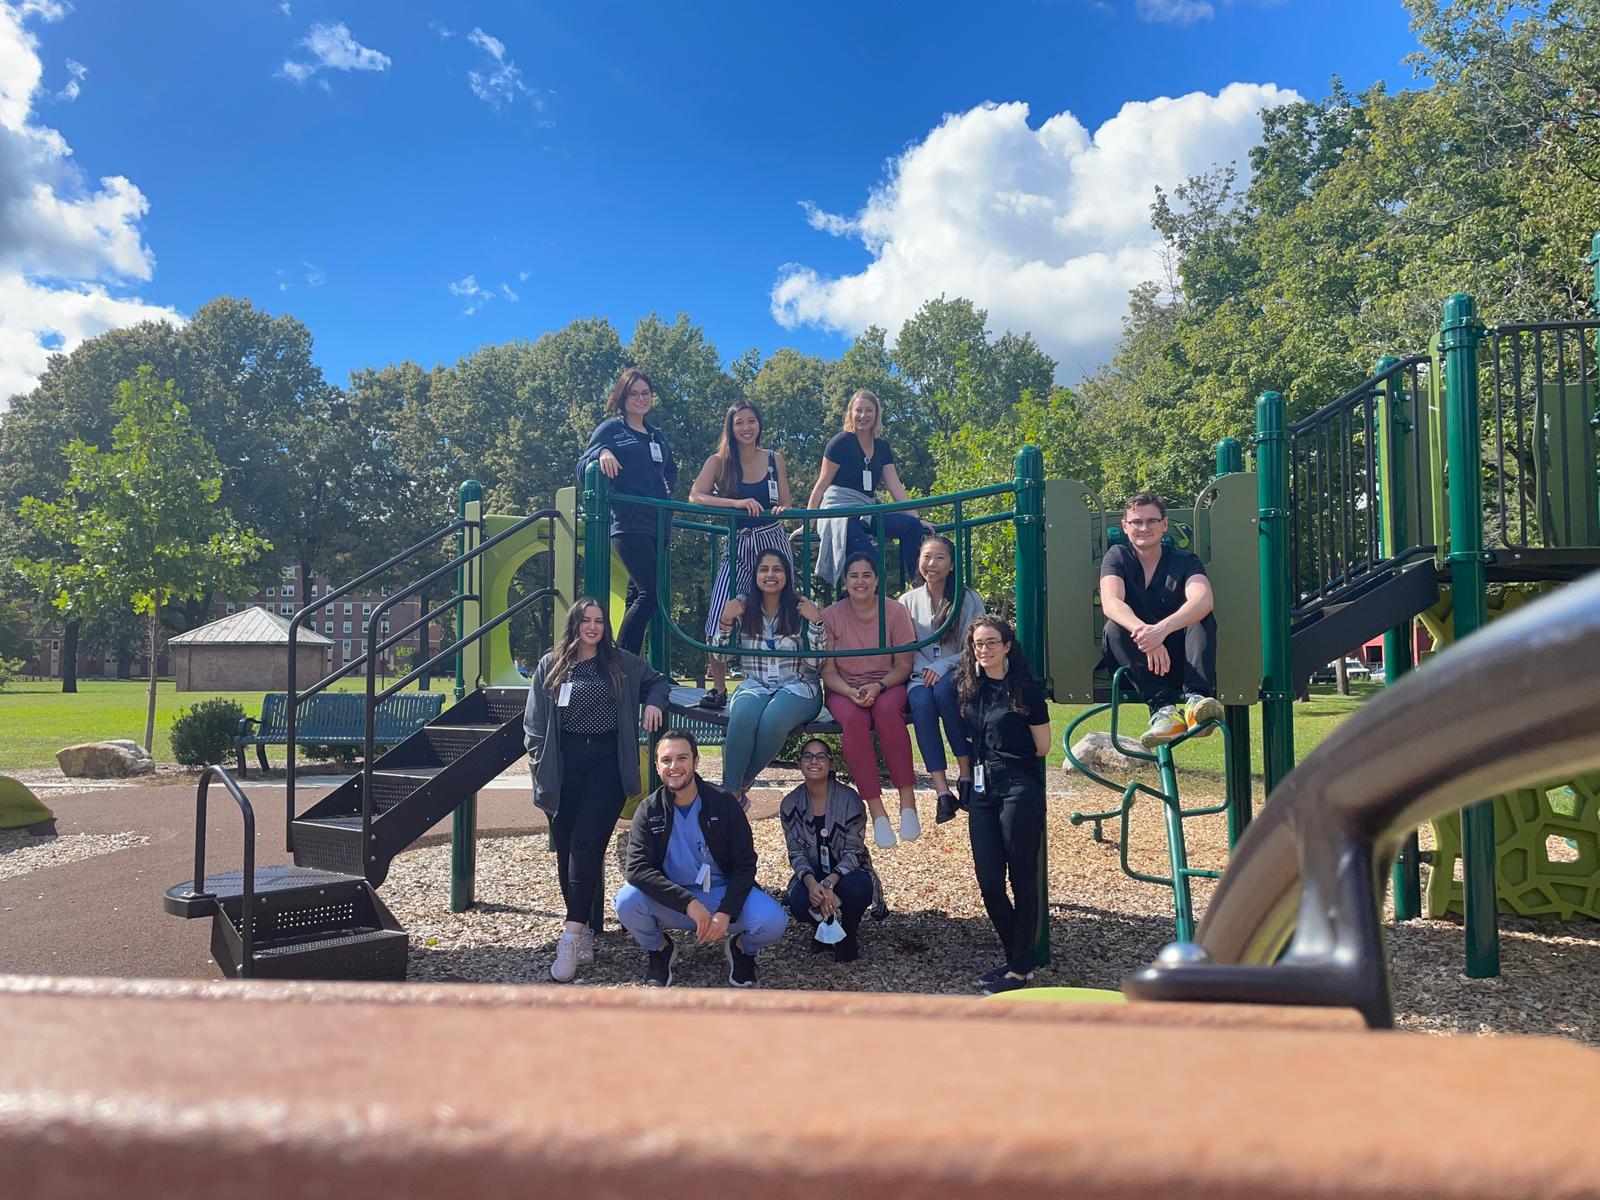 Group photo of Internal Medicine Residents at an outdoor playground 